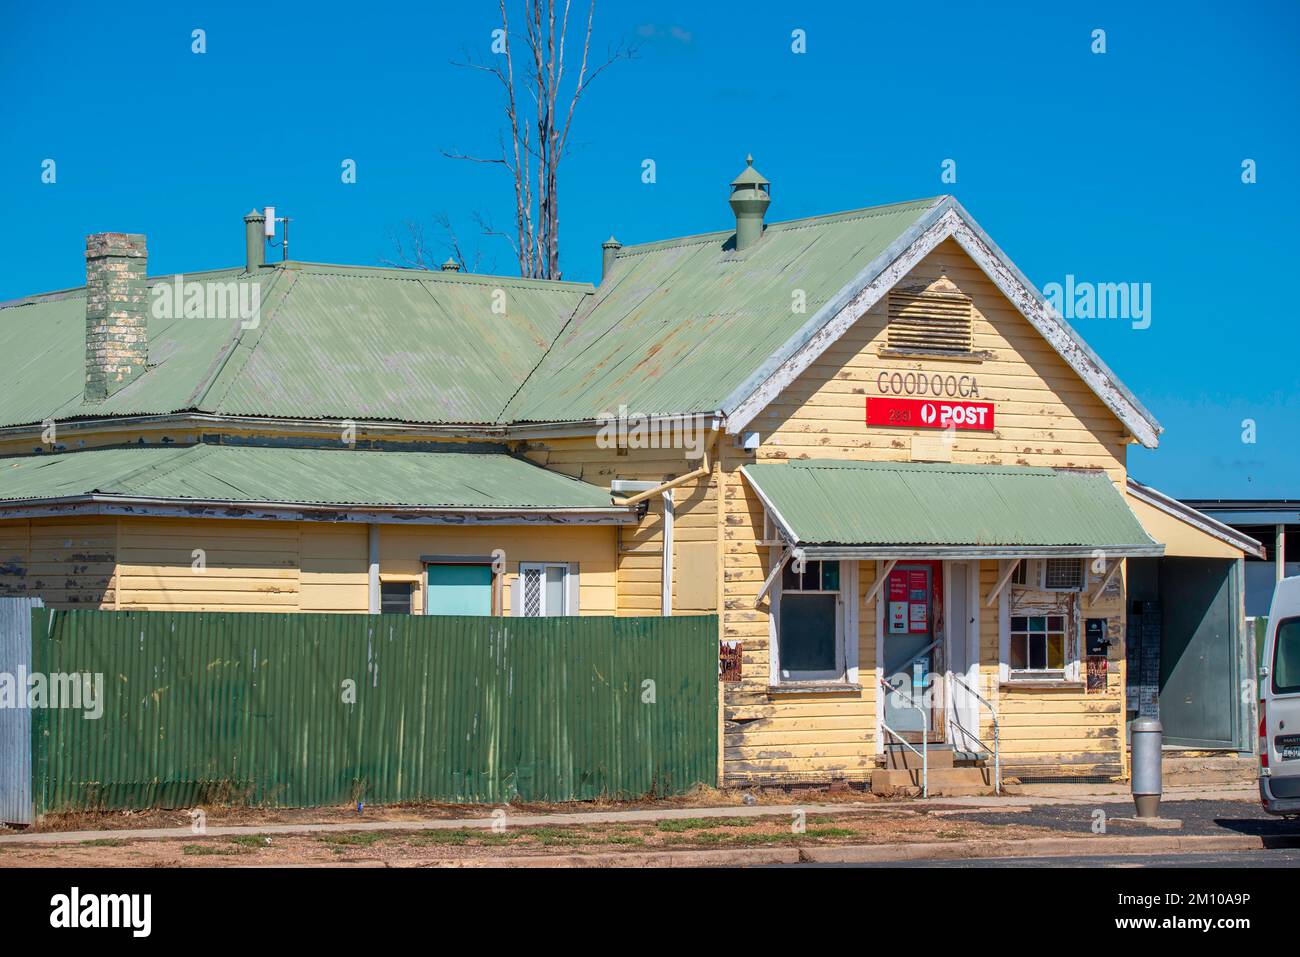 The steel roof and timber weatherboard, Federation style, post office at the village of Goodooga in outback New South Wales, Australia Stock Photo